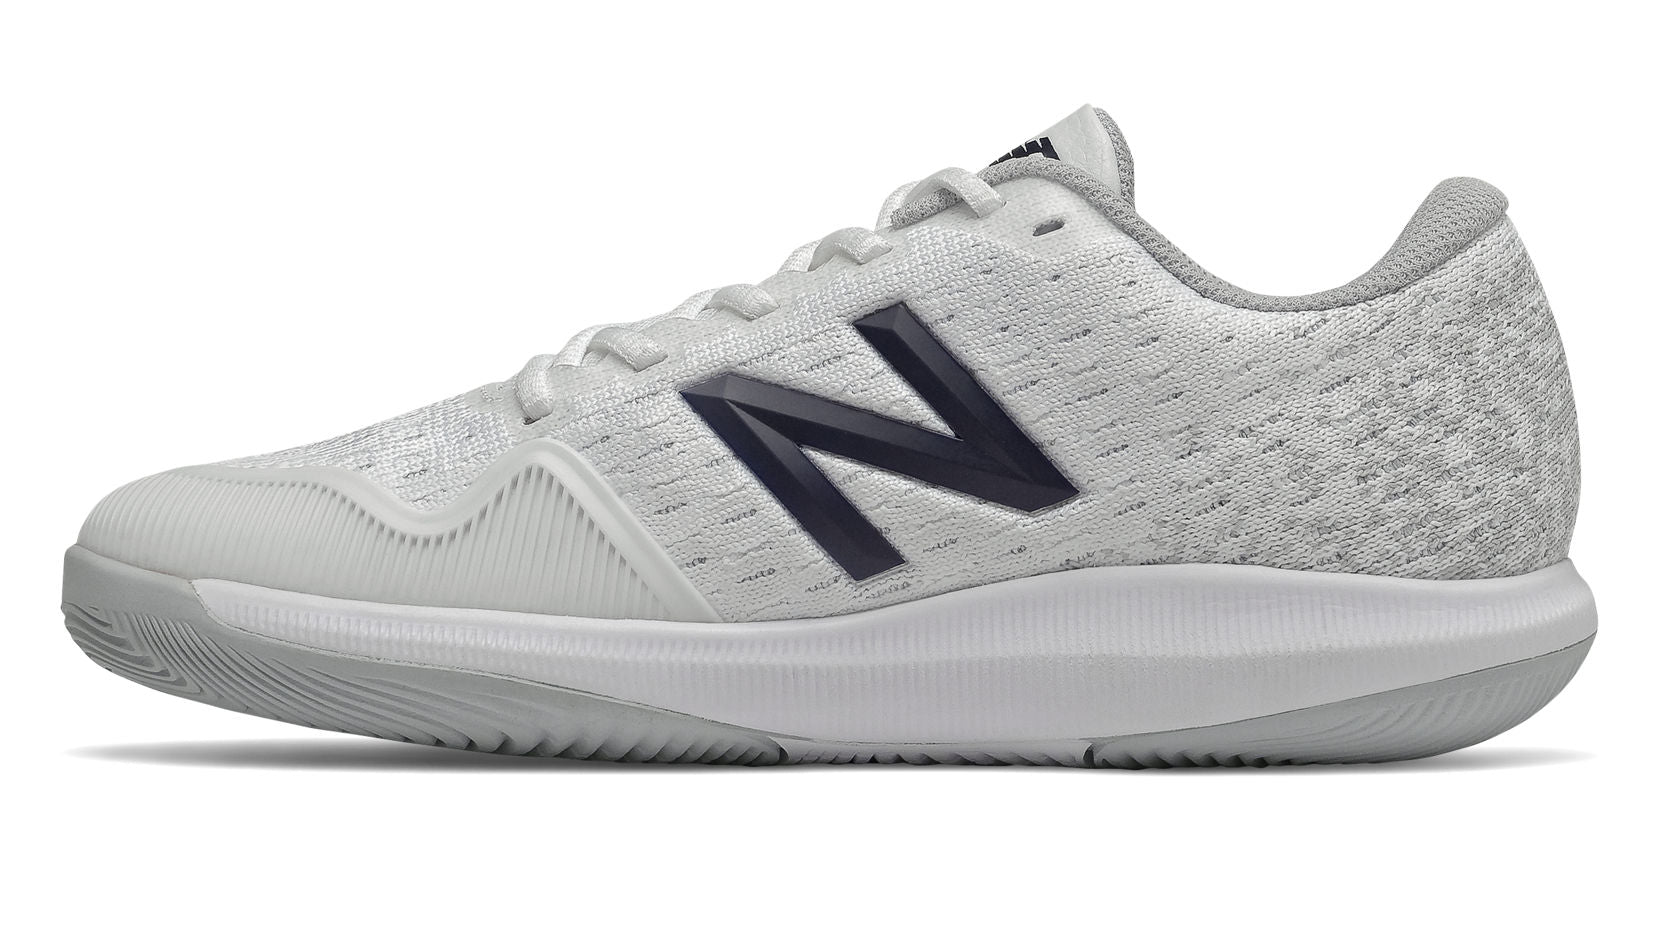 New Balance FuelCell 996V4 B (Women's) - White/Grey